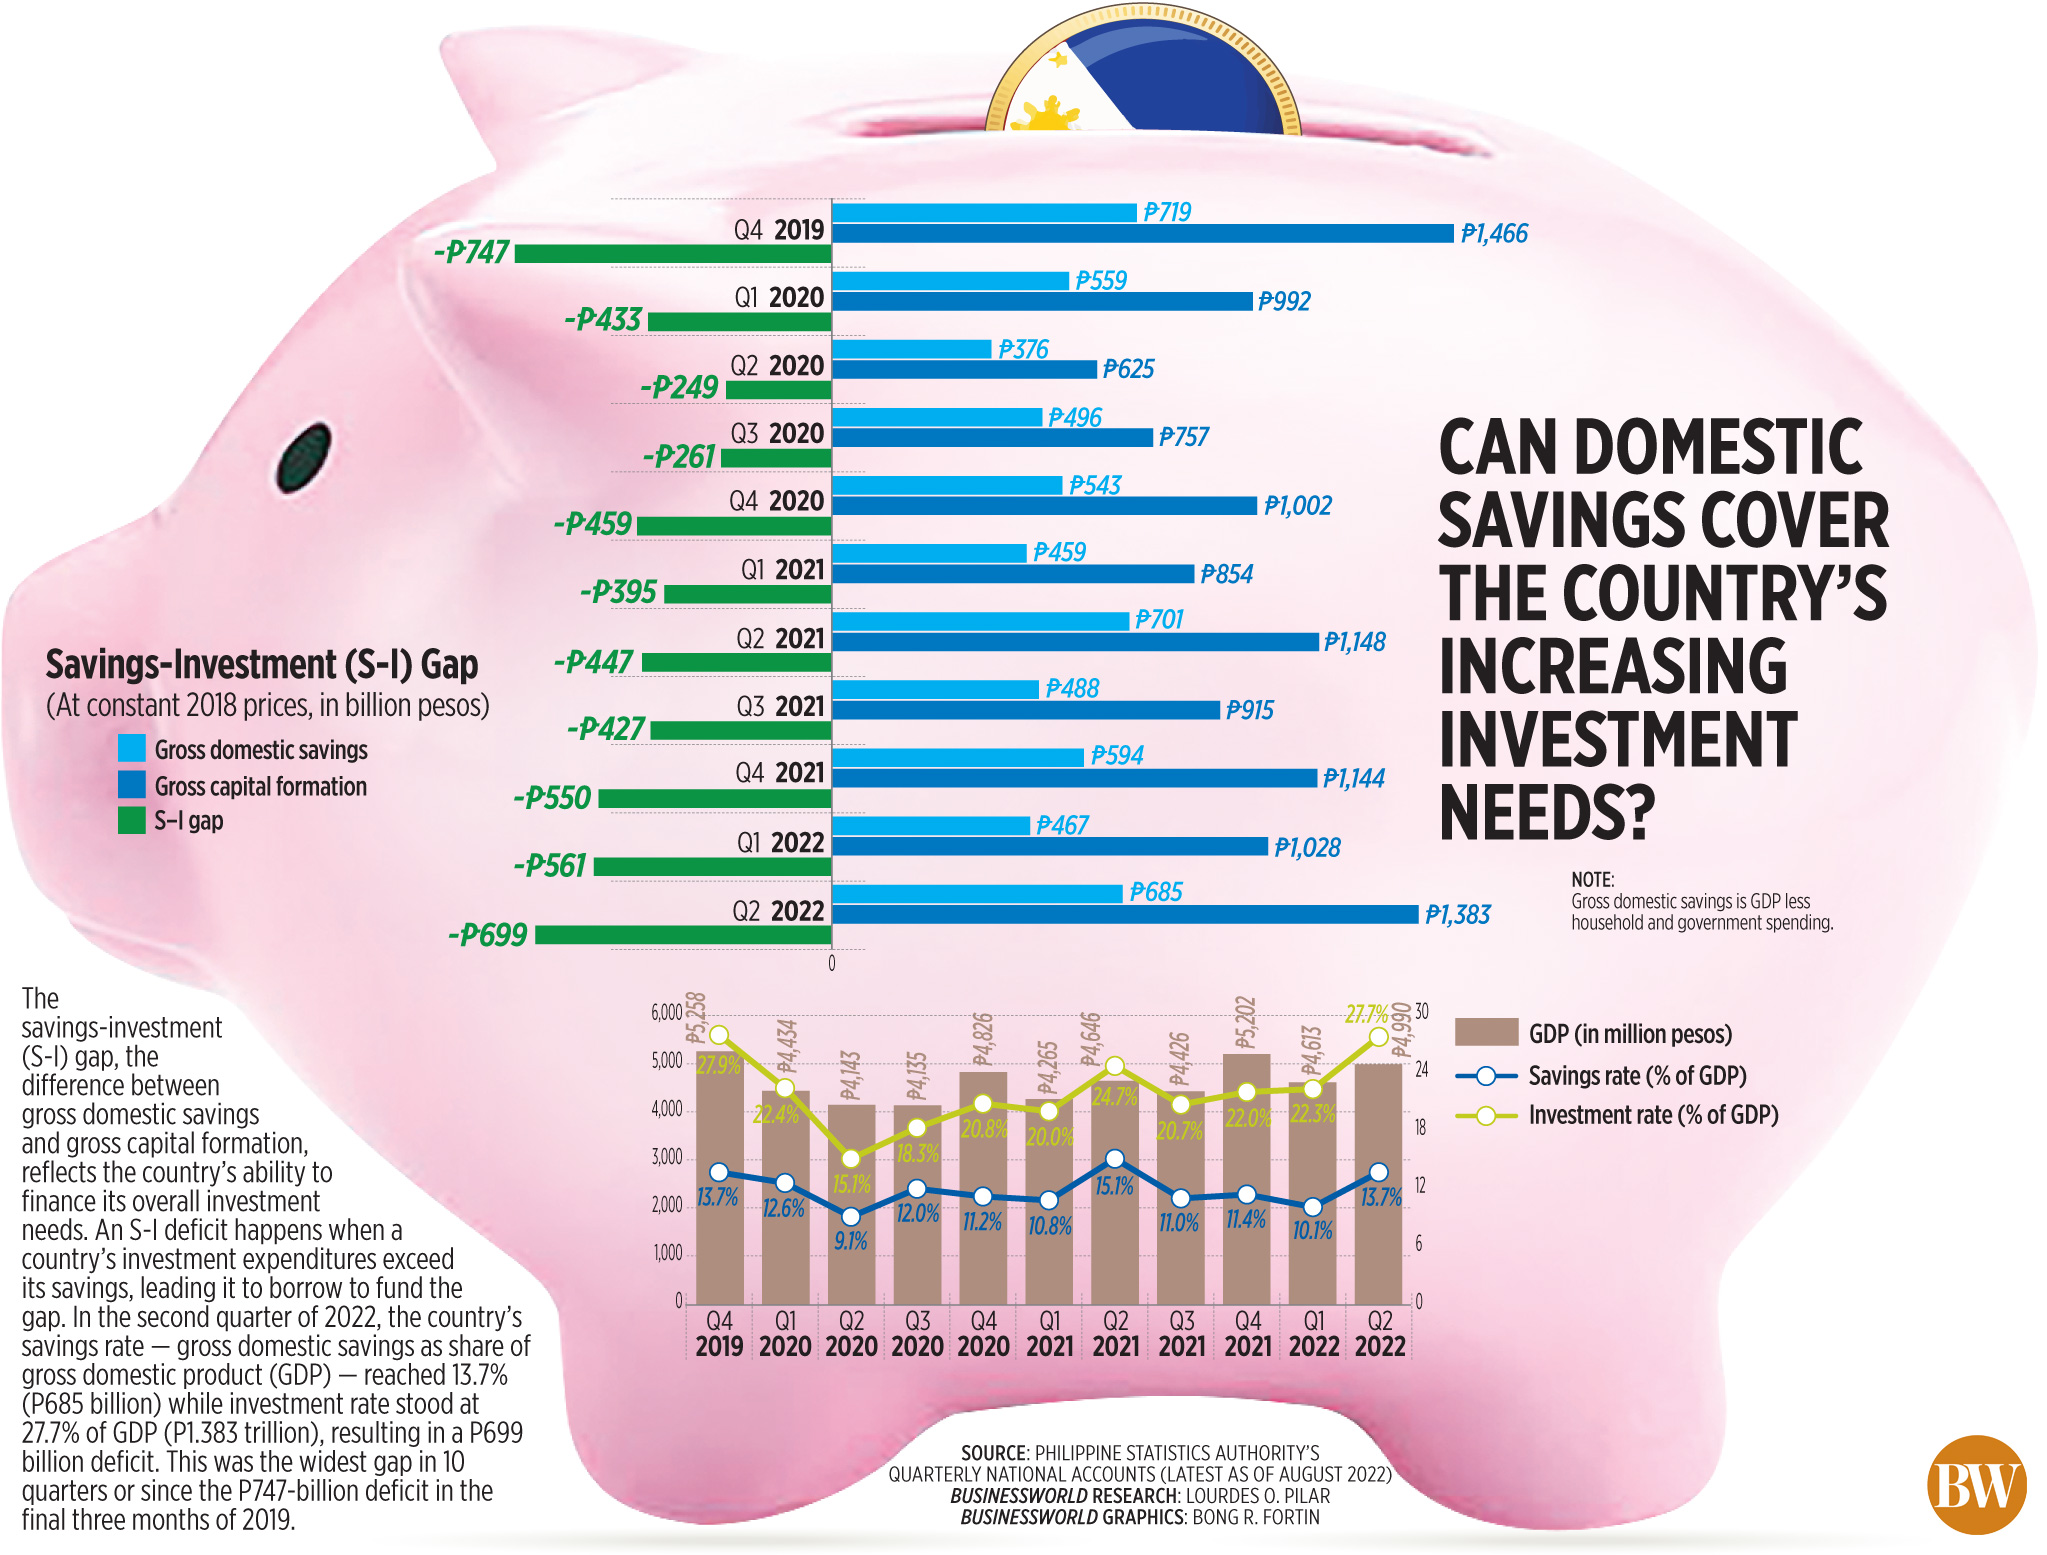 Can domestic savings cover the country’s increasing investment needs?